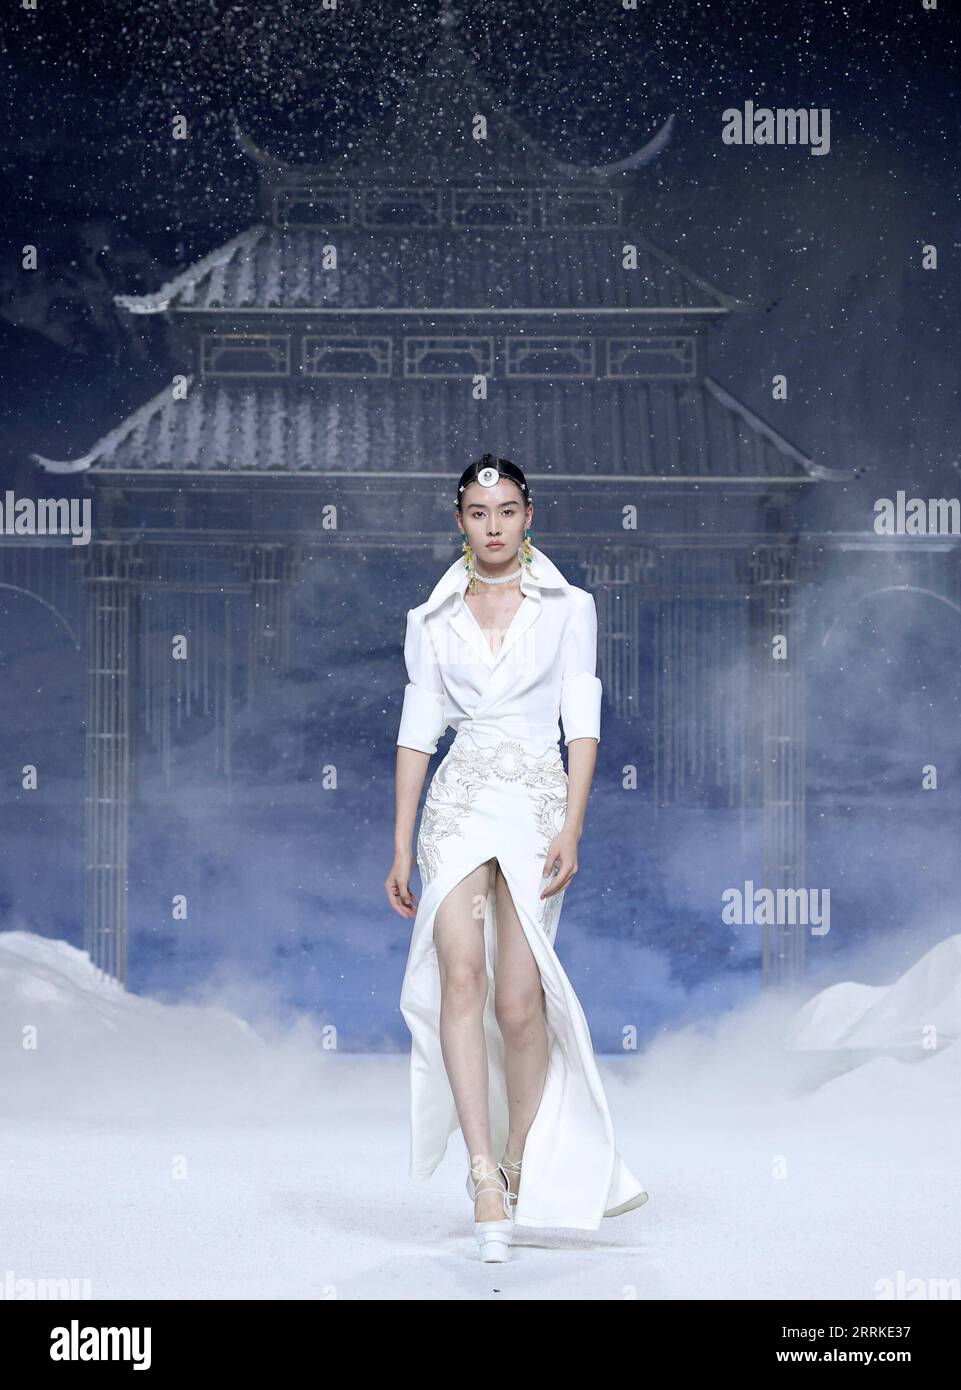 220904 -- BEIJING, Sept. 4, 2022 -- A model presents a creation by designer Xiong Ying during the opening fashion show of China Fashion Week S/S 2023 in Beijing, capital of China, Sept. 4, 2022. The fashion week kicked off here on Sunday.  CHINA-BEIJING-FASHION WEEK CN ChenxJianli PUBLICATIONxNOTxINxCHN Stock Photo